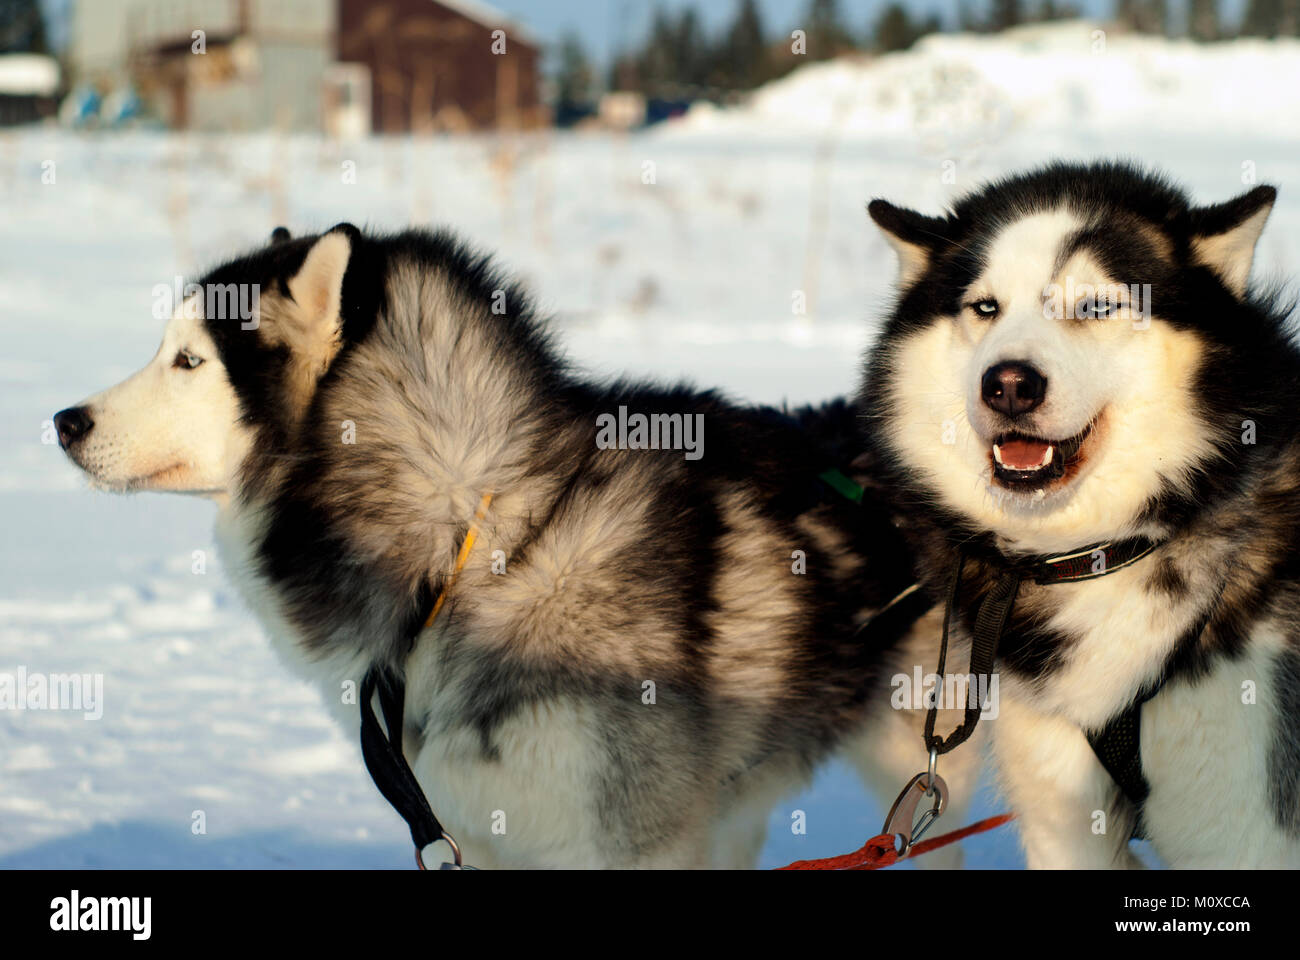 Two Siberian huskies-twins in harness before the start of the dog sledding race close-up on a blurred background Stock Photo